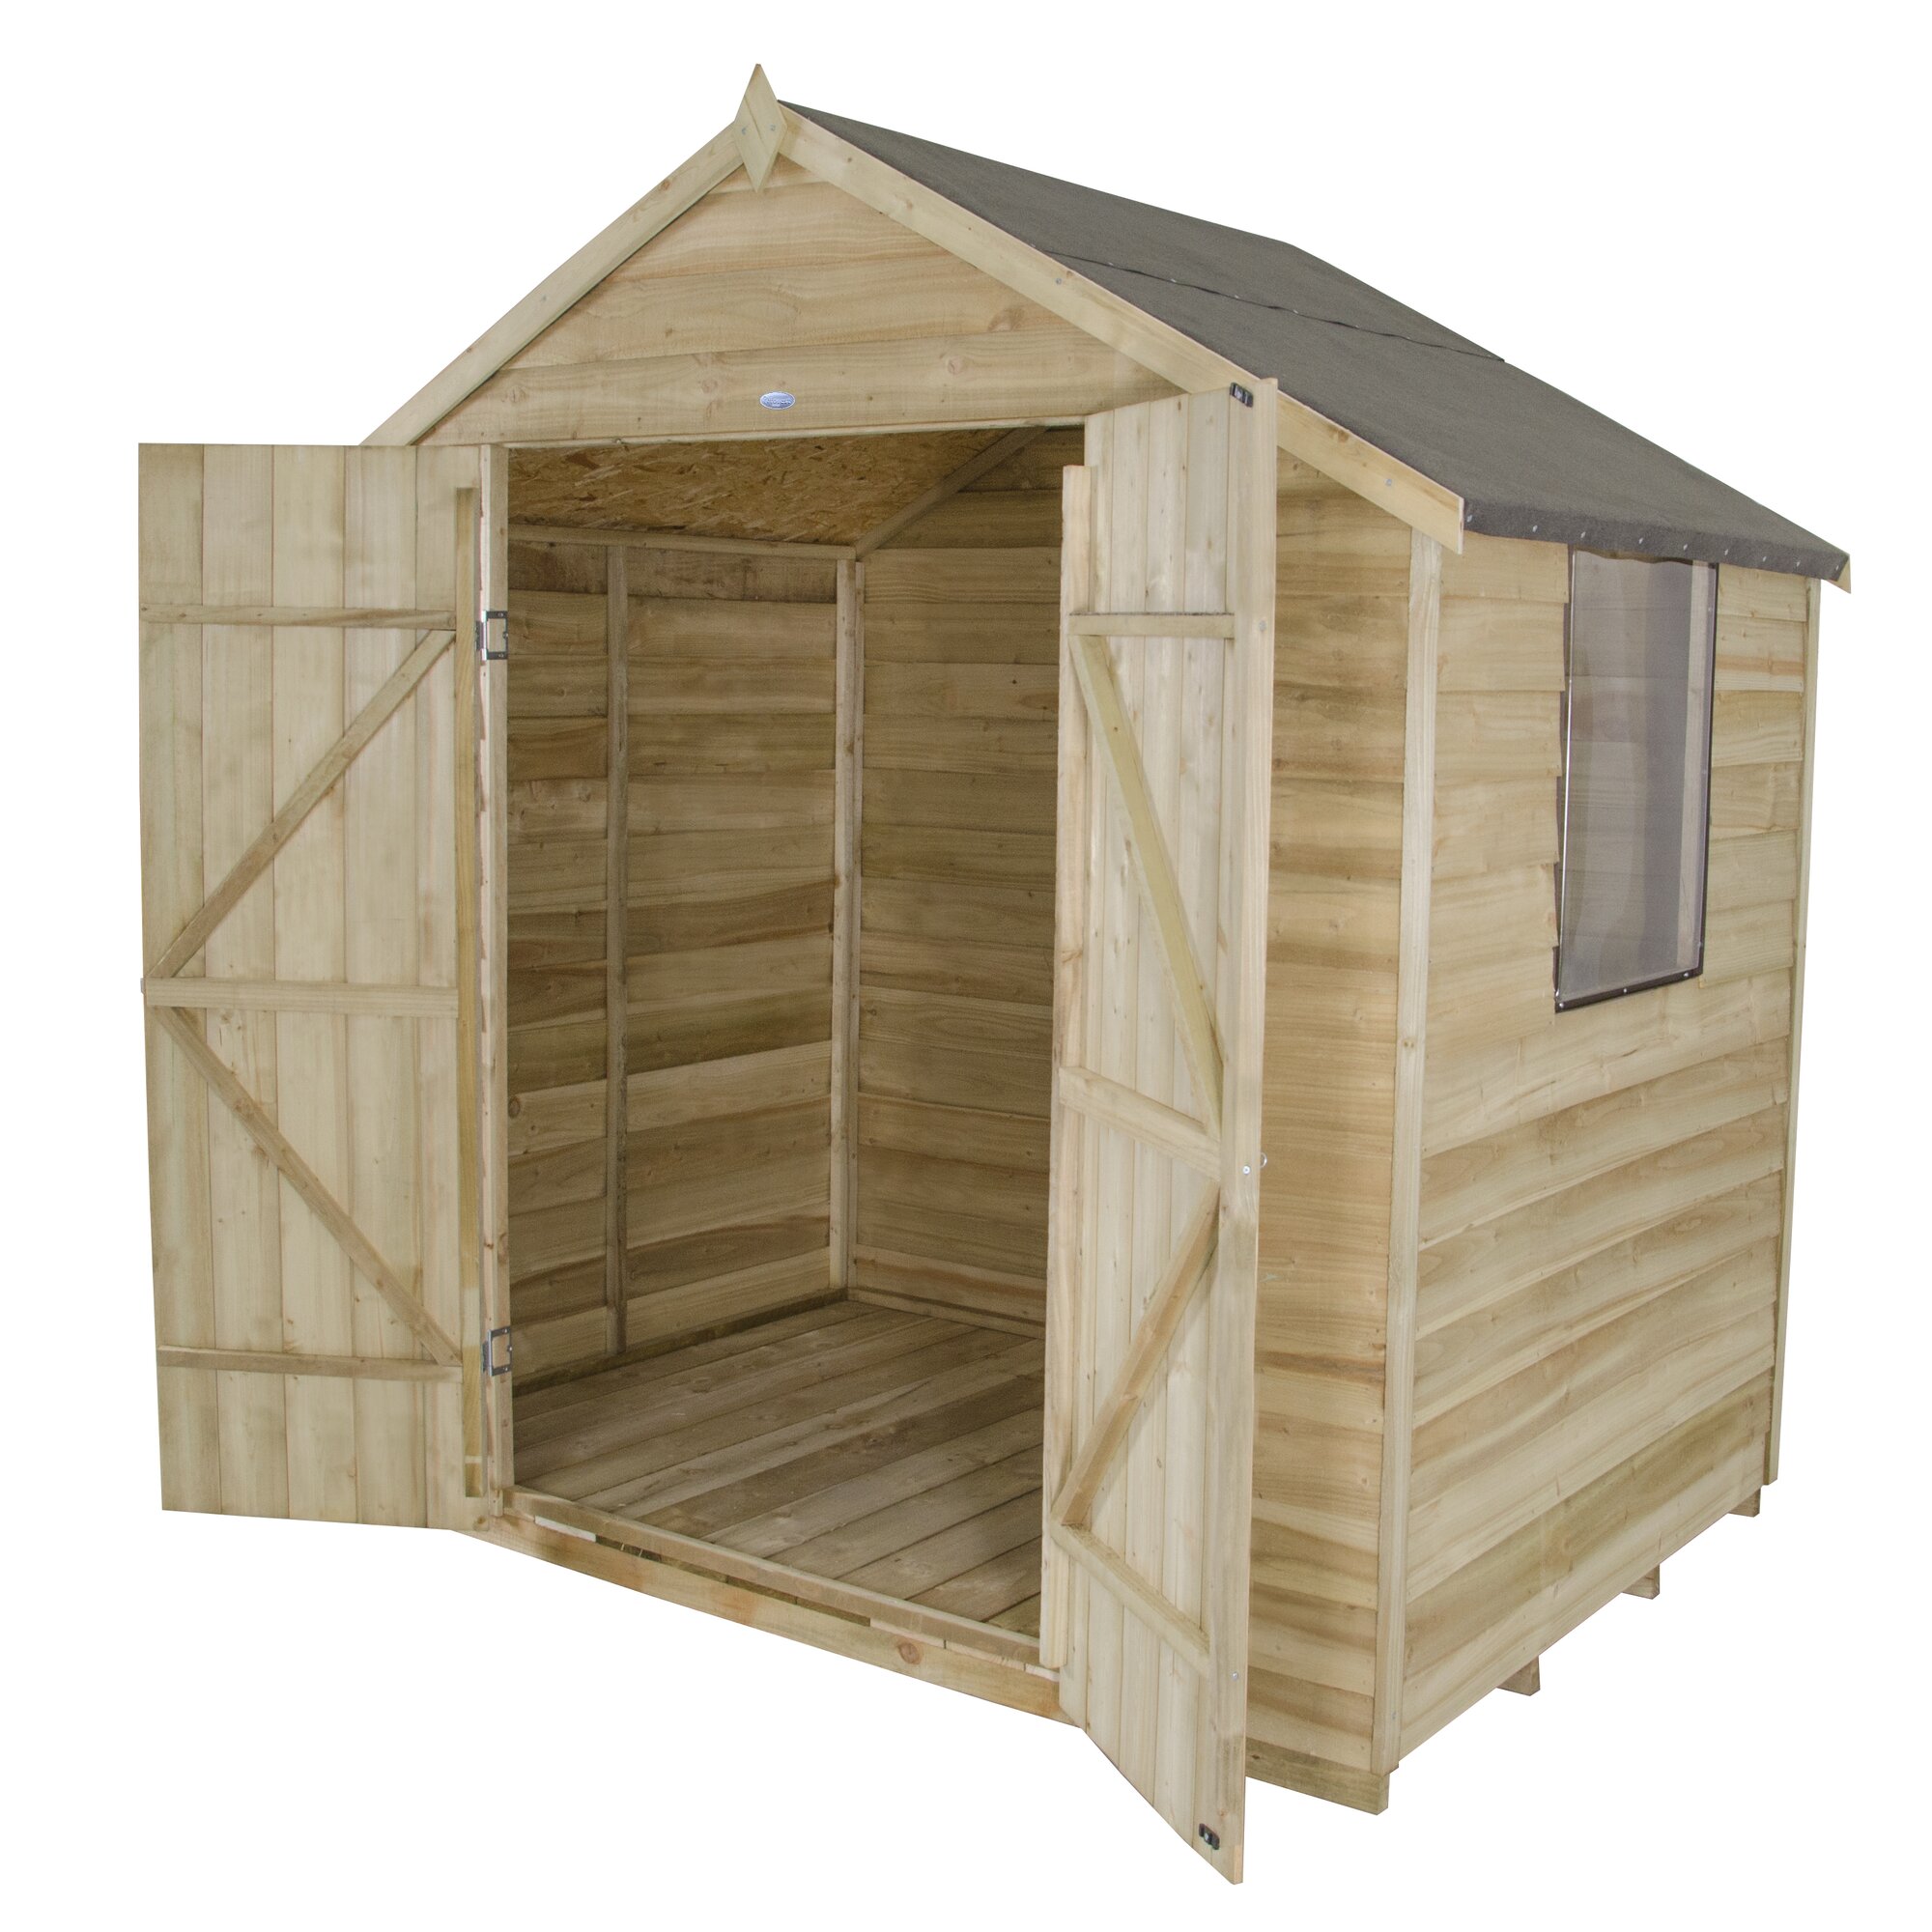 Forest Garden 7 x 5 Wooden Storage Shed &amp; Reviews 